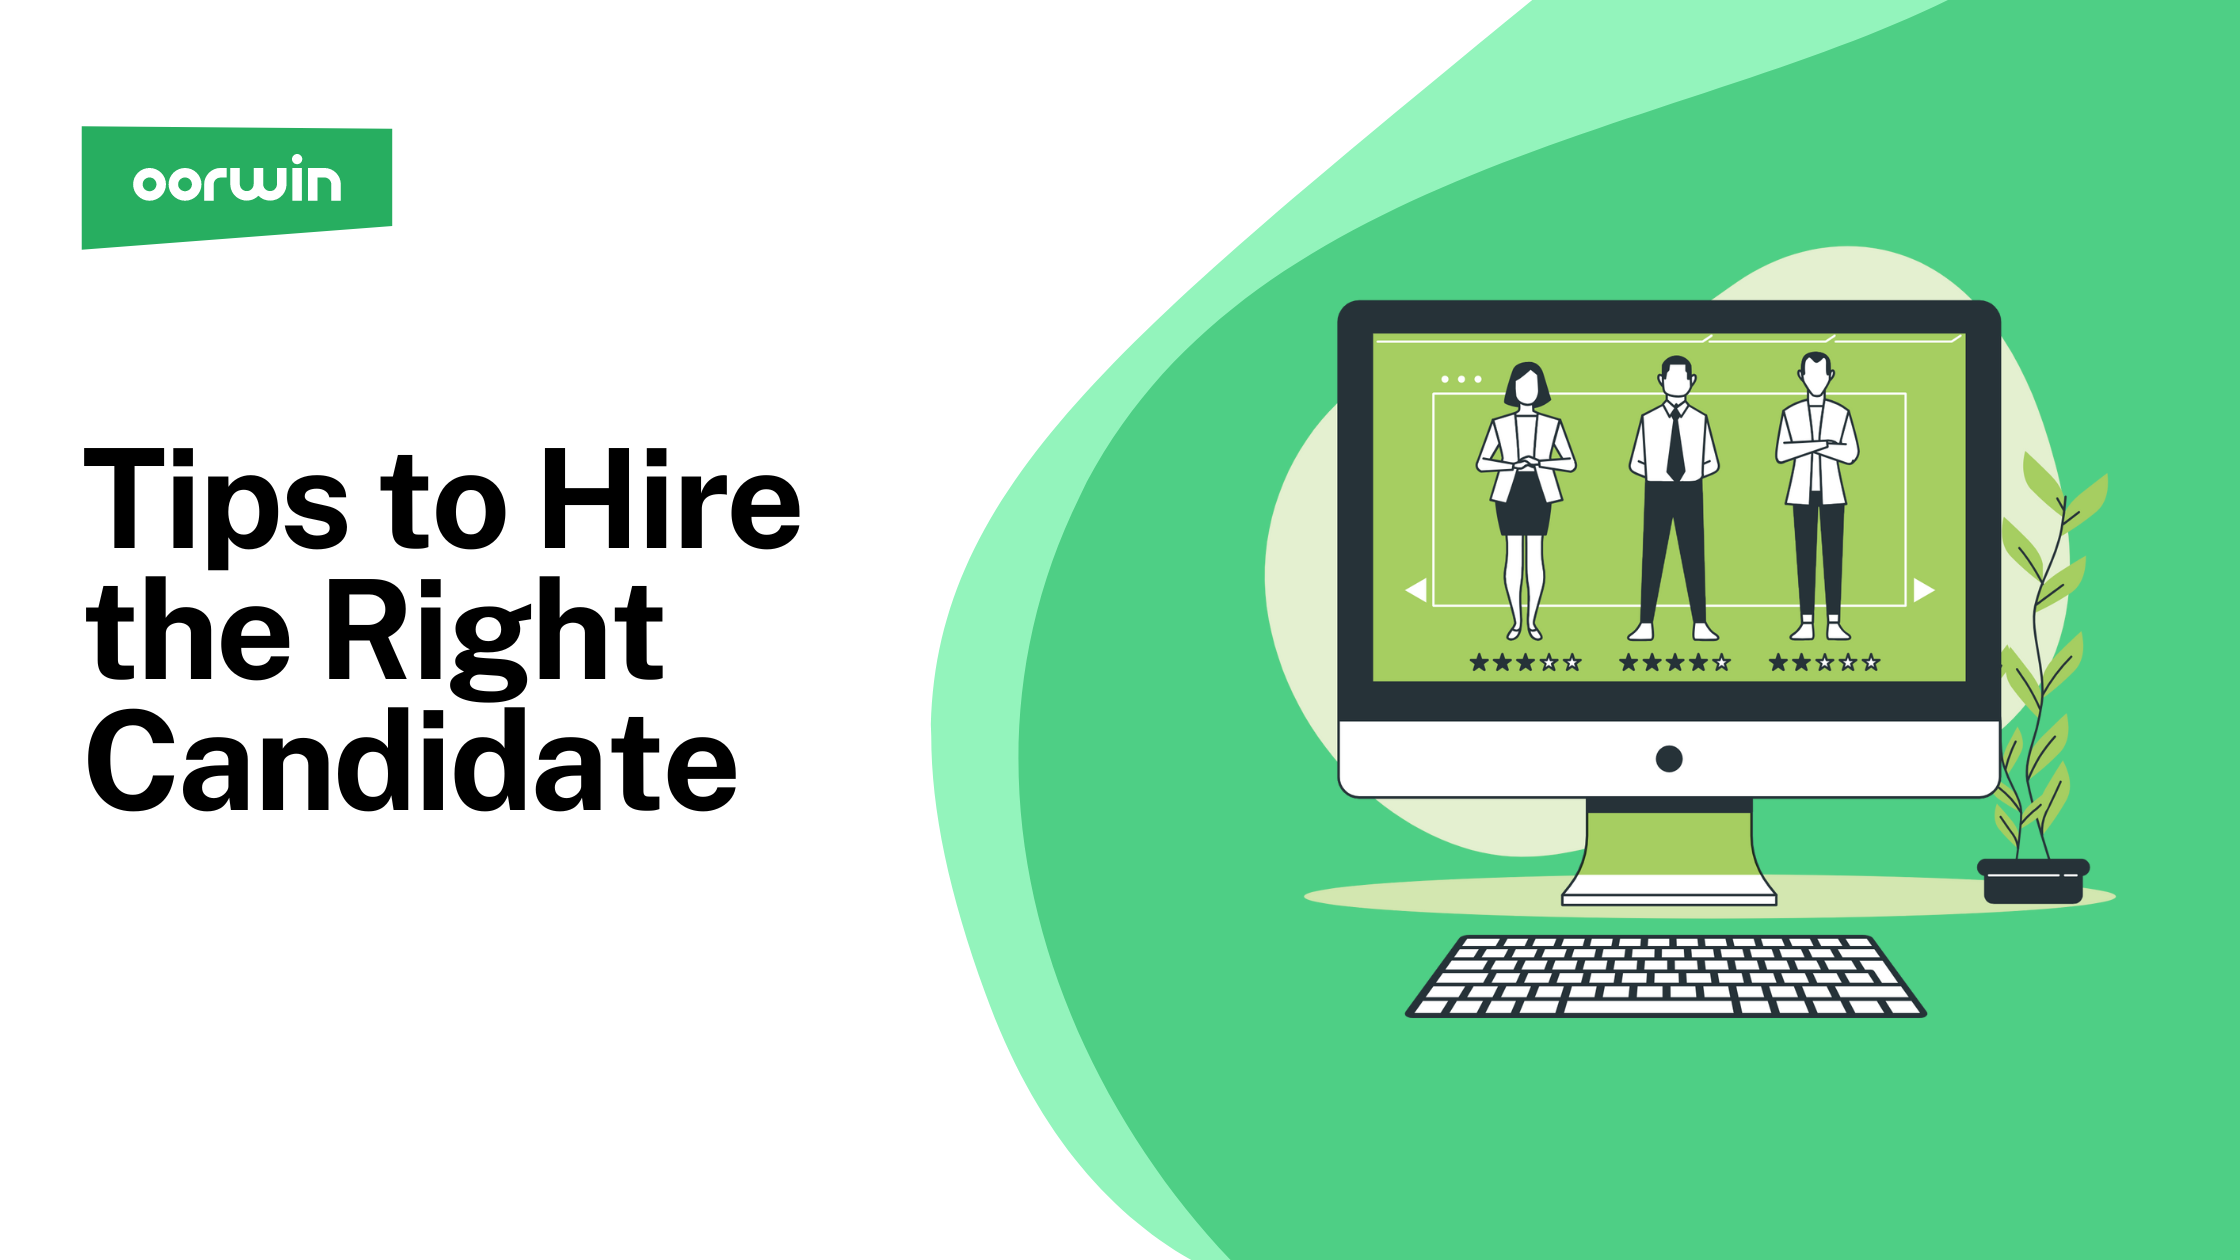 Tips to Hire the Right Candidate